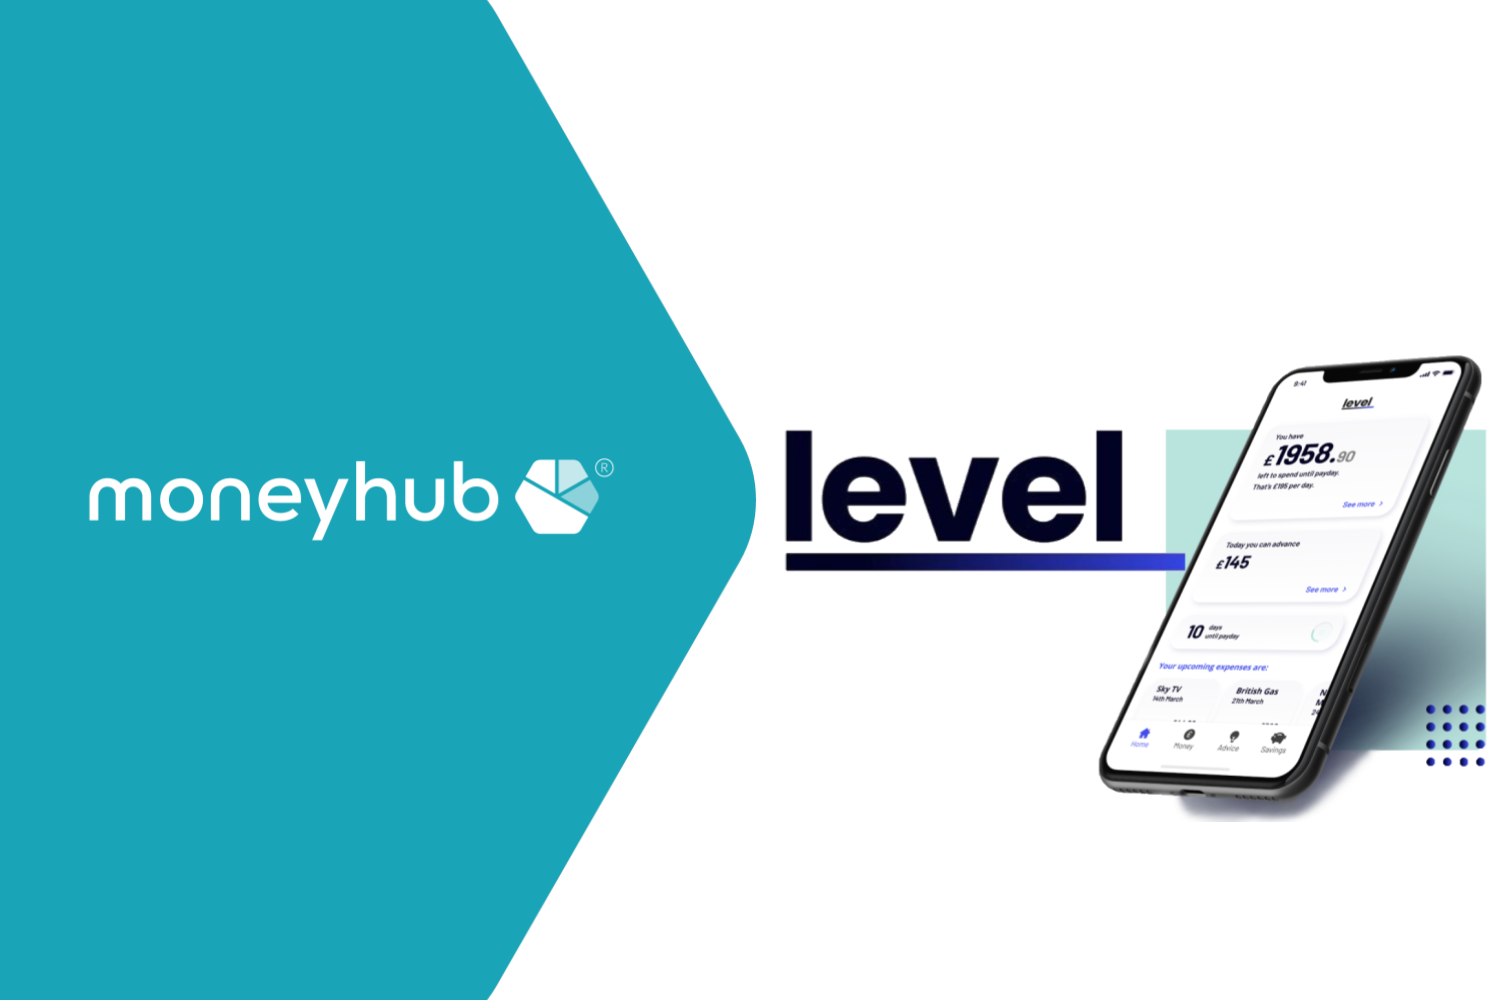 Moneyhub technology supports Level Financial Technology with Capita employee wellbeing offering — Moneyhub